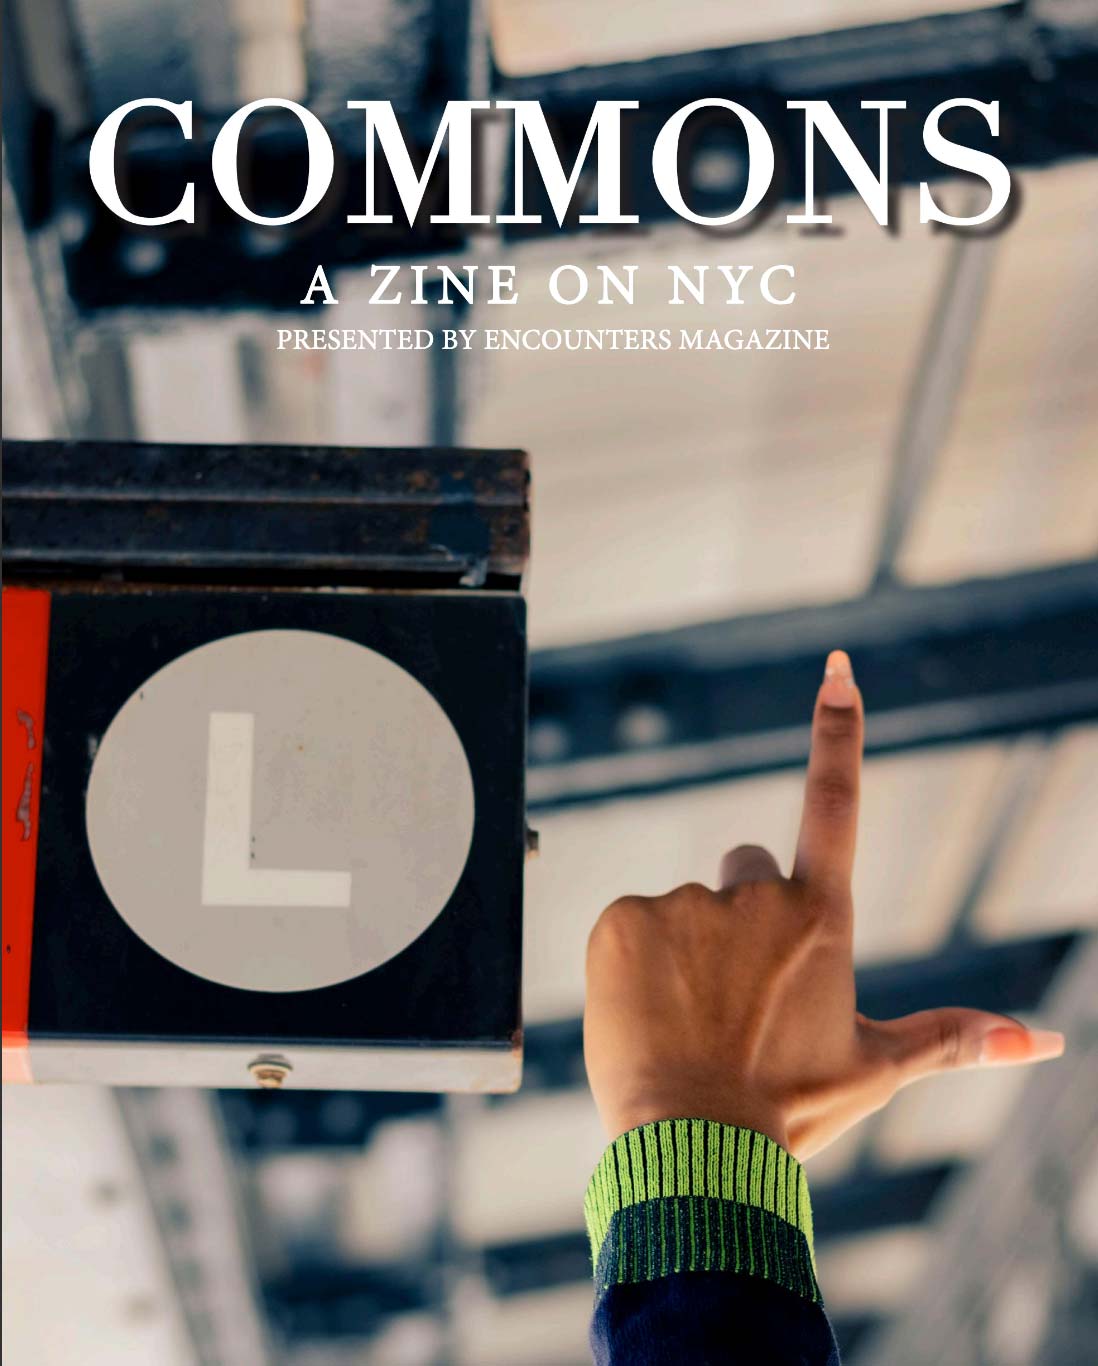 Capturing the Essence of NYC: “Commons” Zine Showcases CUNY Students’ Perspectives